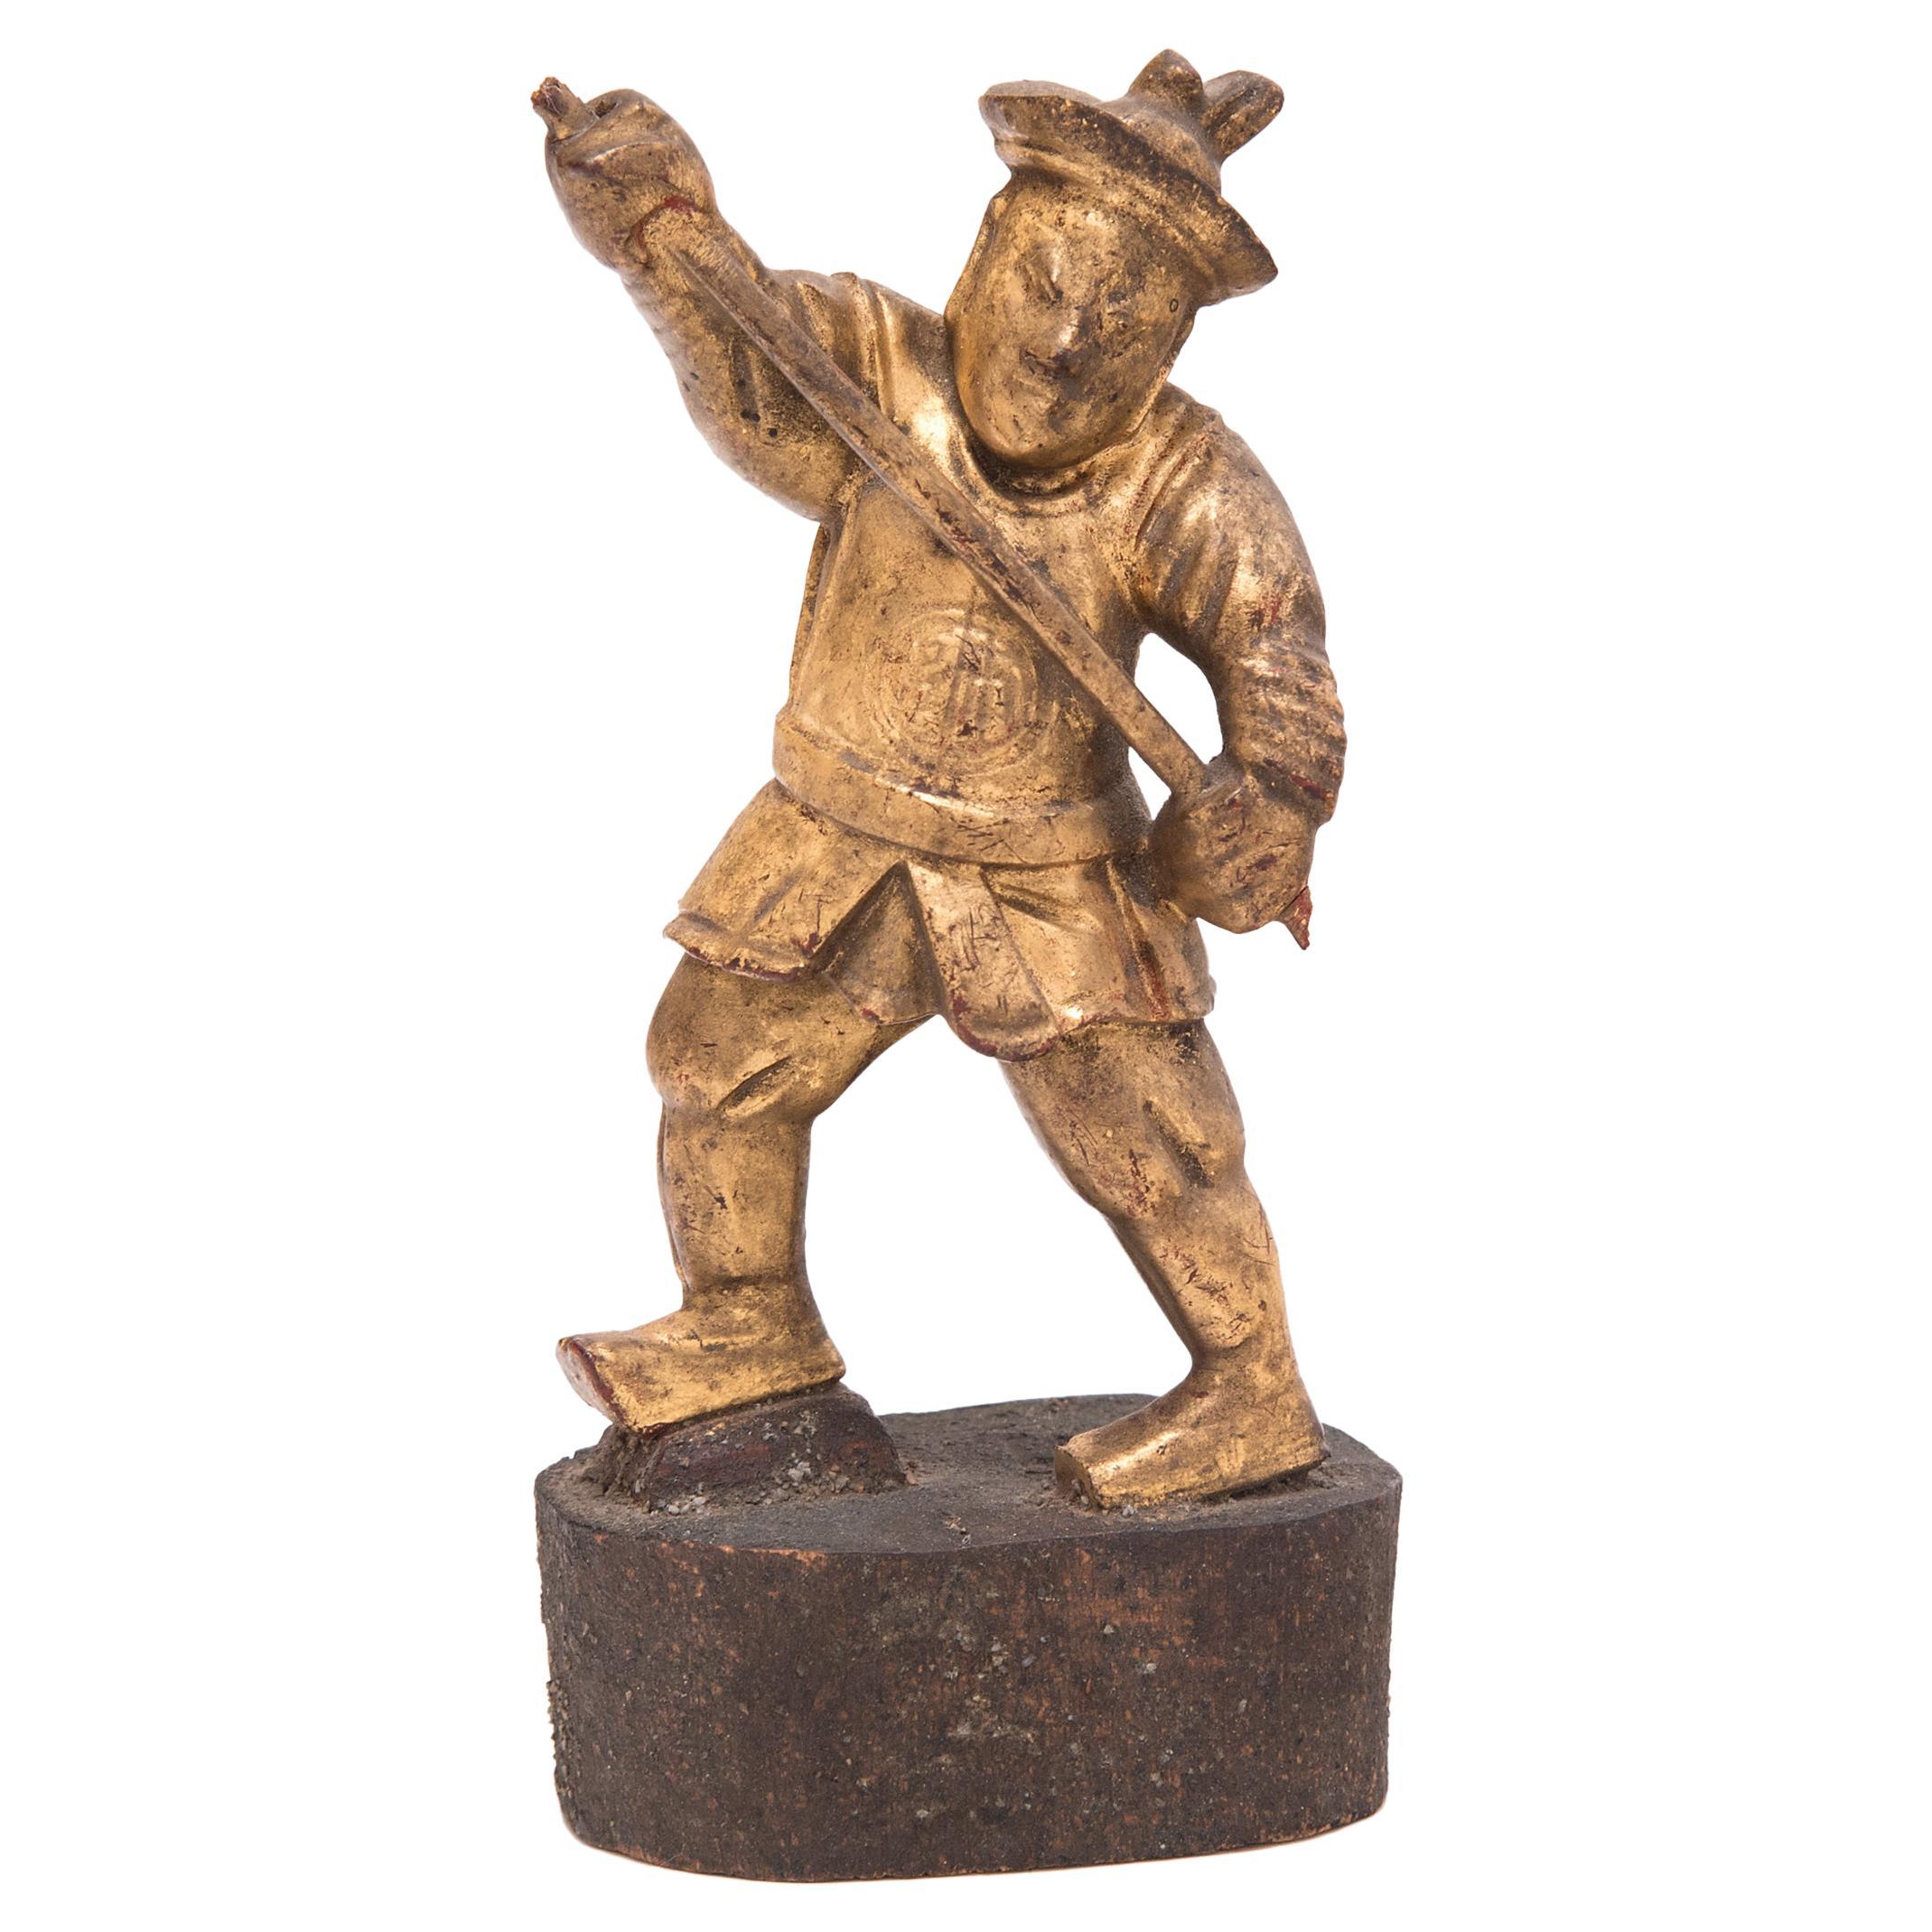 Chinese Gilt Soldier Figurine, Qing Dynasty